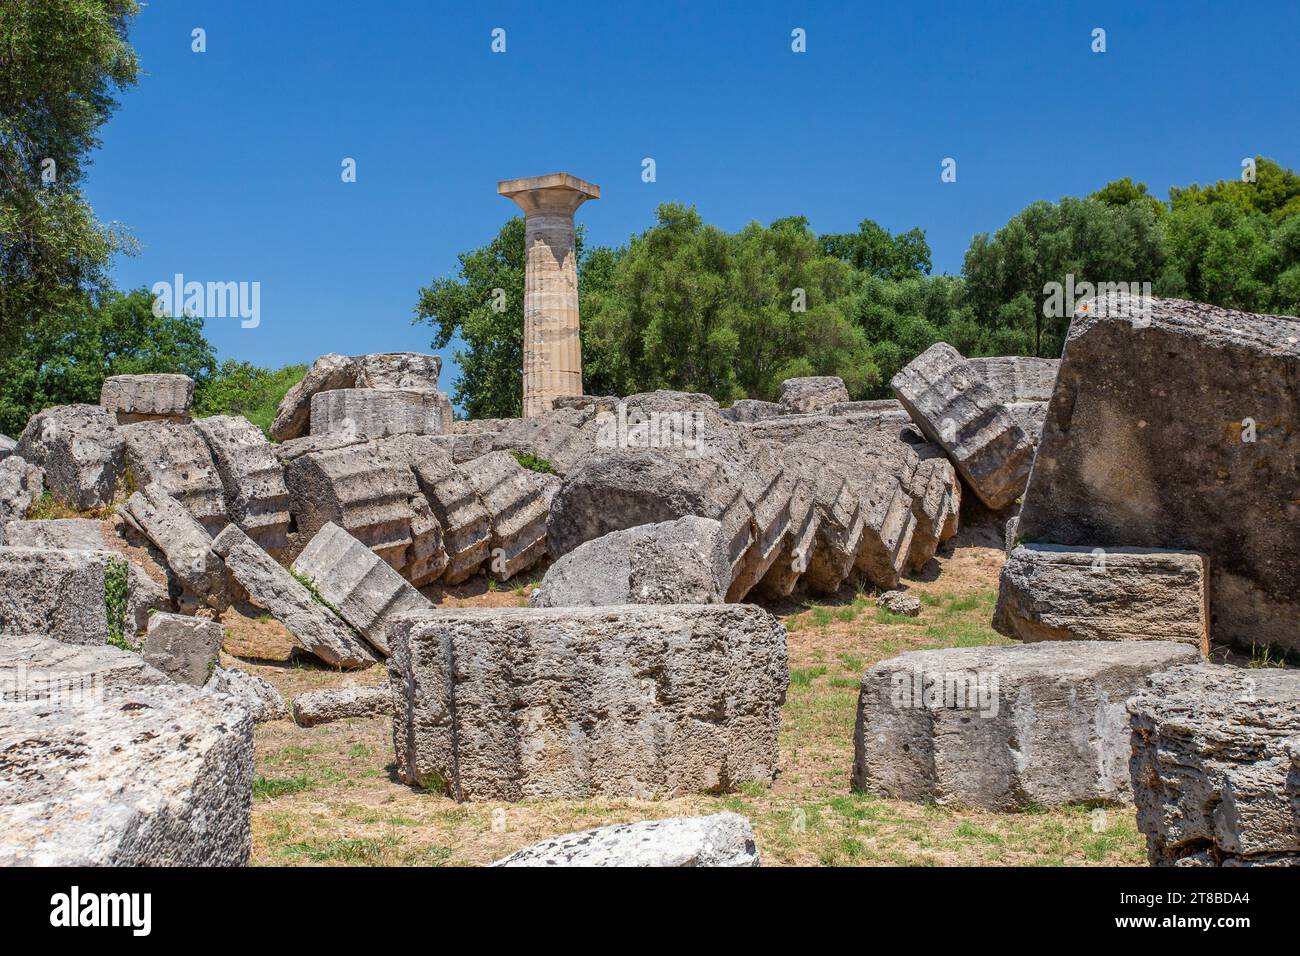 Temple of Zeus at the Ancient Greek ruins at Olympia, the home of the Olympic games, Peloponnese, Greece Stock Photo